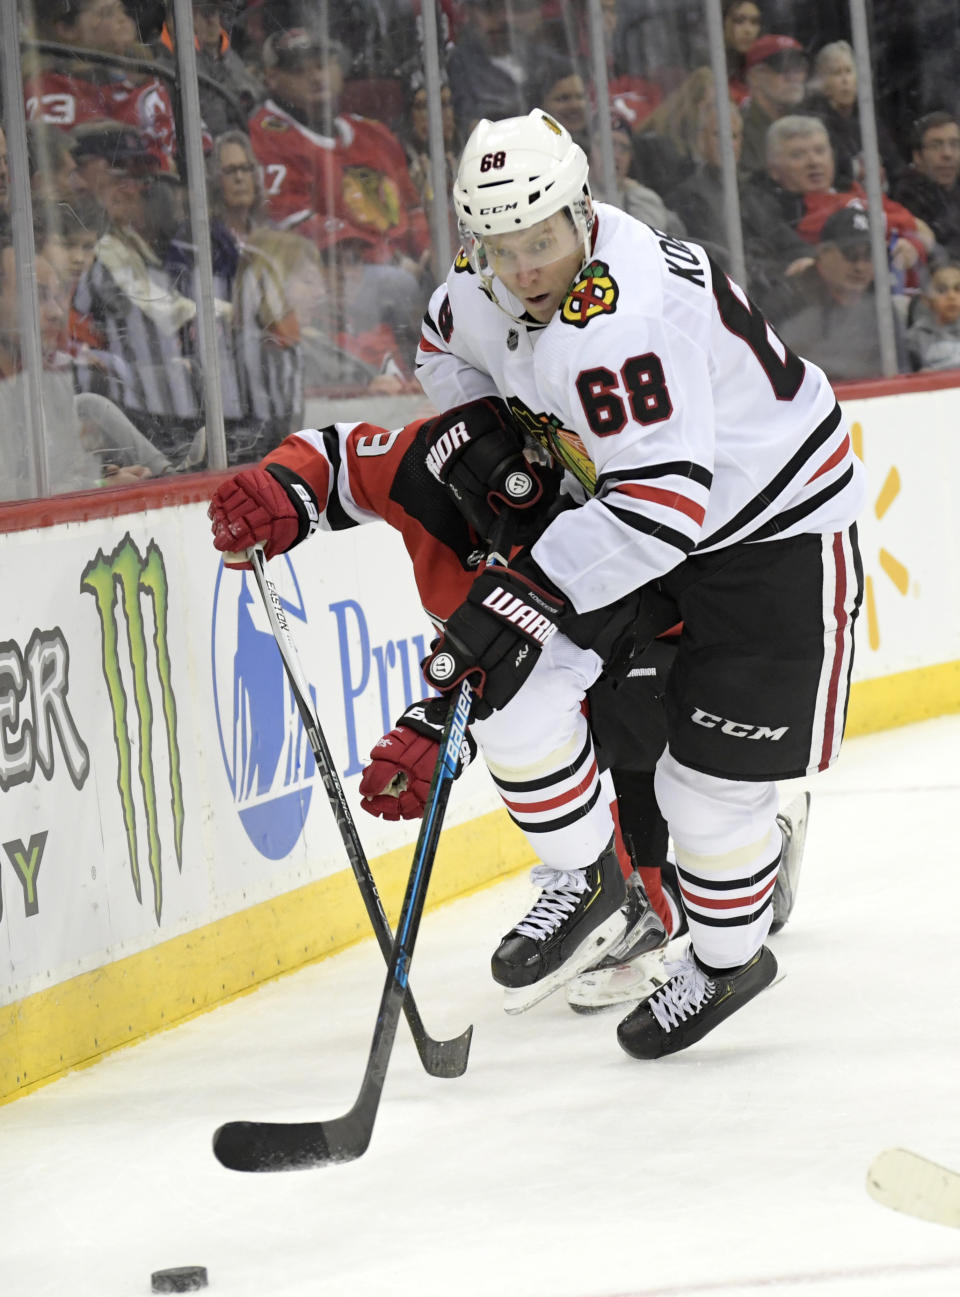 Chicago Blackhawks defenseman Slater Koekkoek (68) chases after the puck during the second period of an NHL hockey game against the New Jersey Devils,Friday, Dec. 6, 2019, in Newark, N.J. (AP Photo/Bill Kostroun)